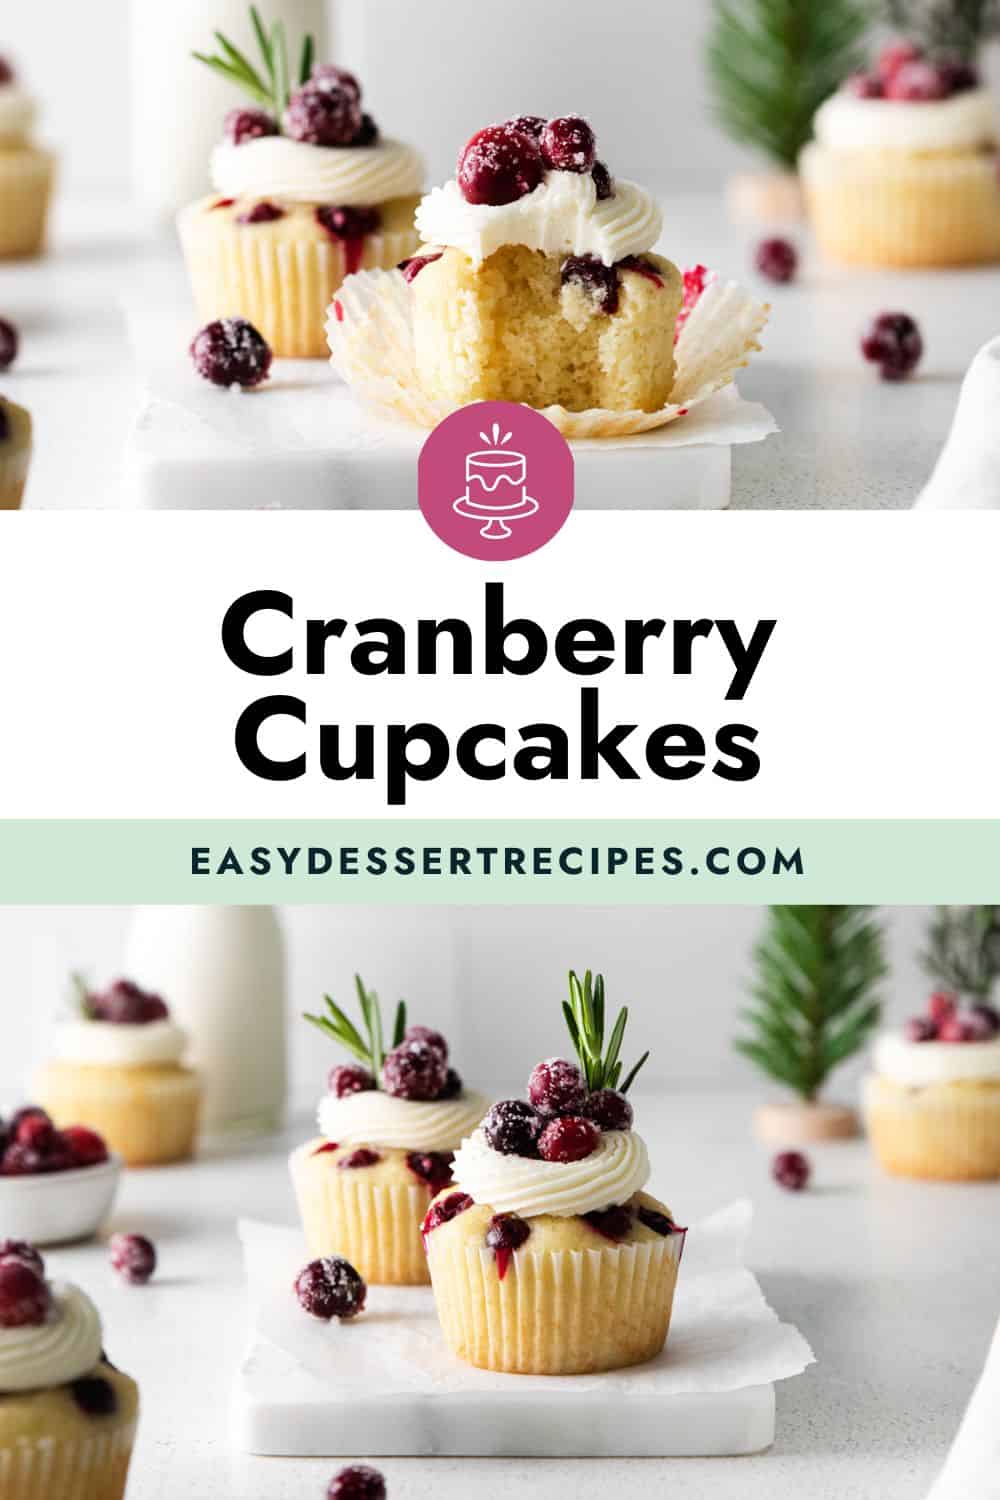 Cranberry cupcakes with white frosting and cranberries.